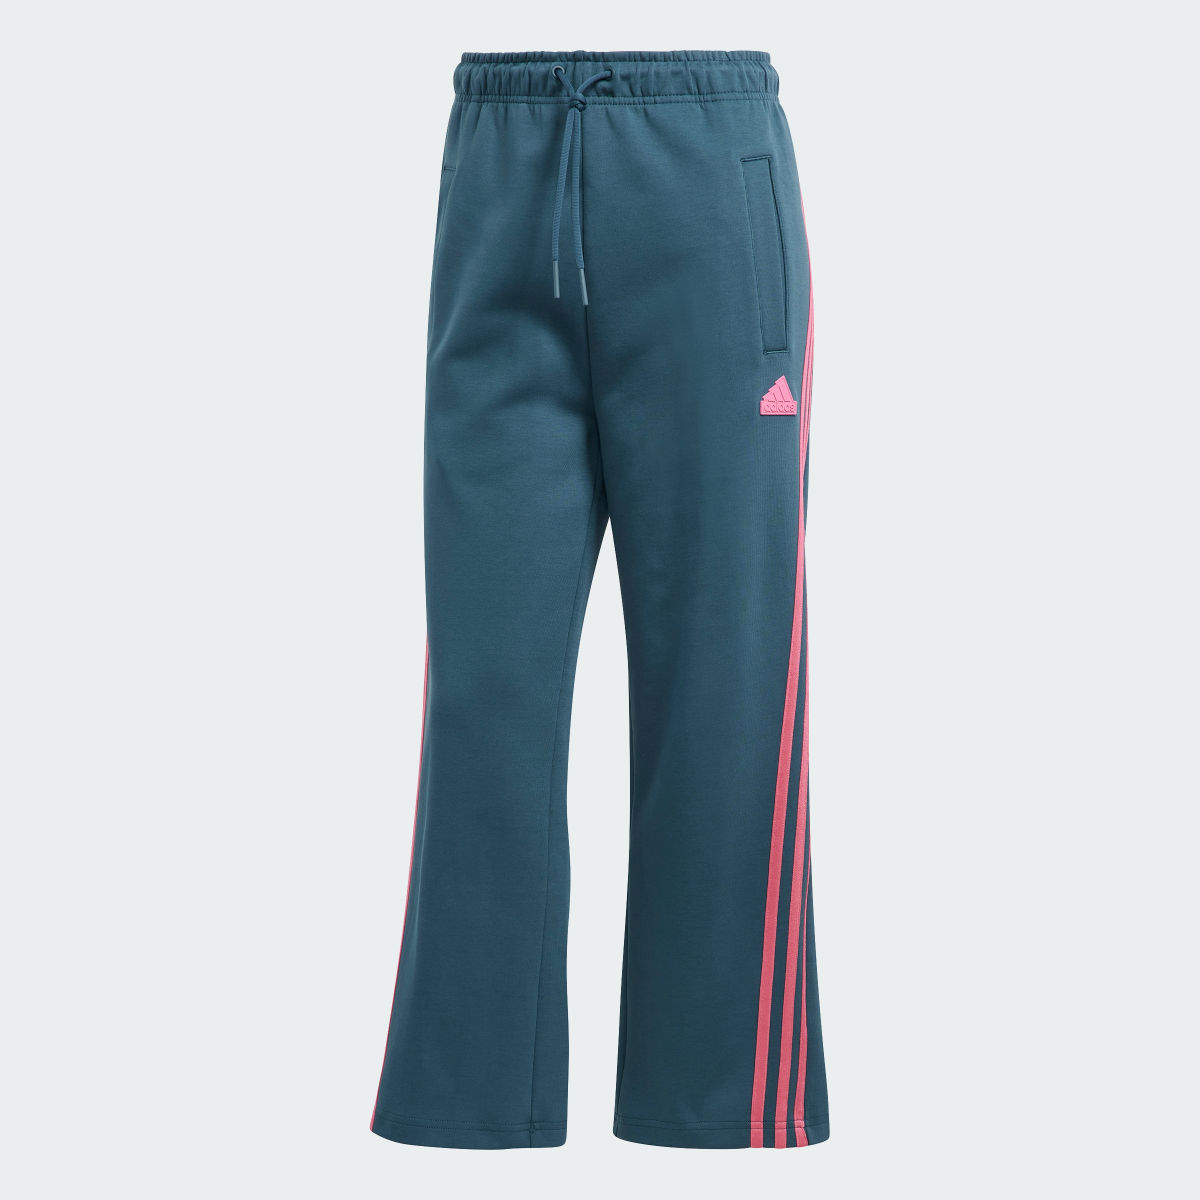 Adidas Future Icons 3-Stripes Tracksuit Bottoms. 4